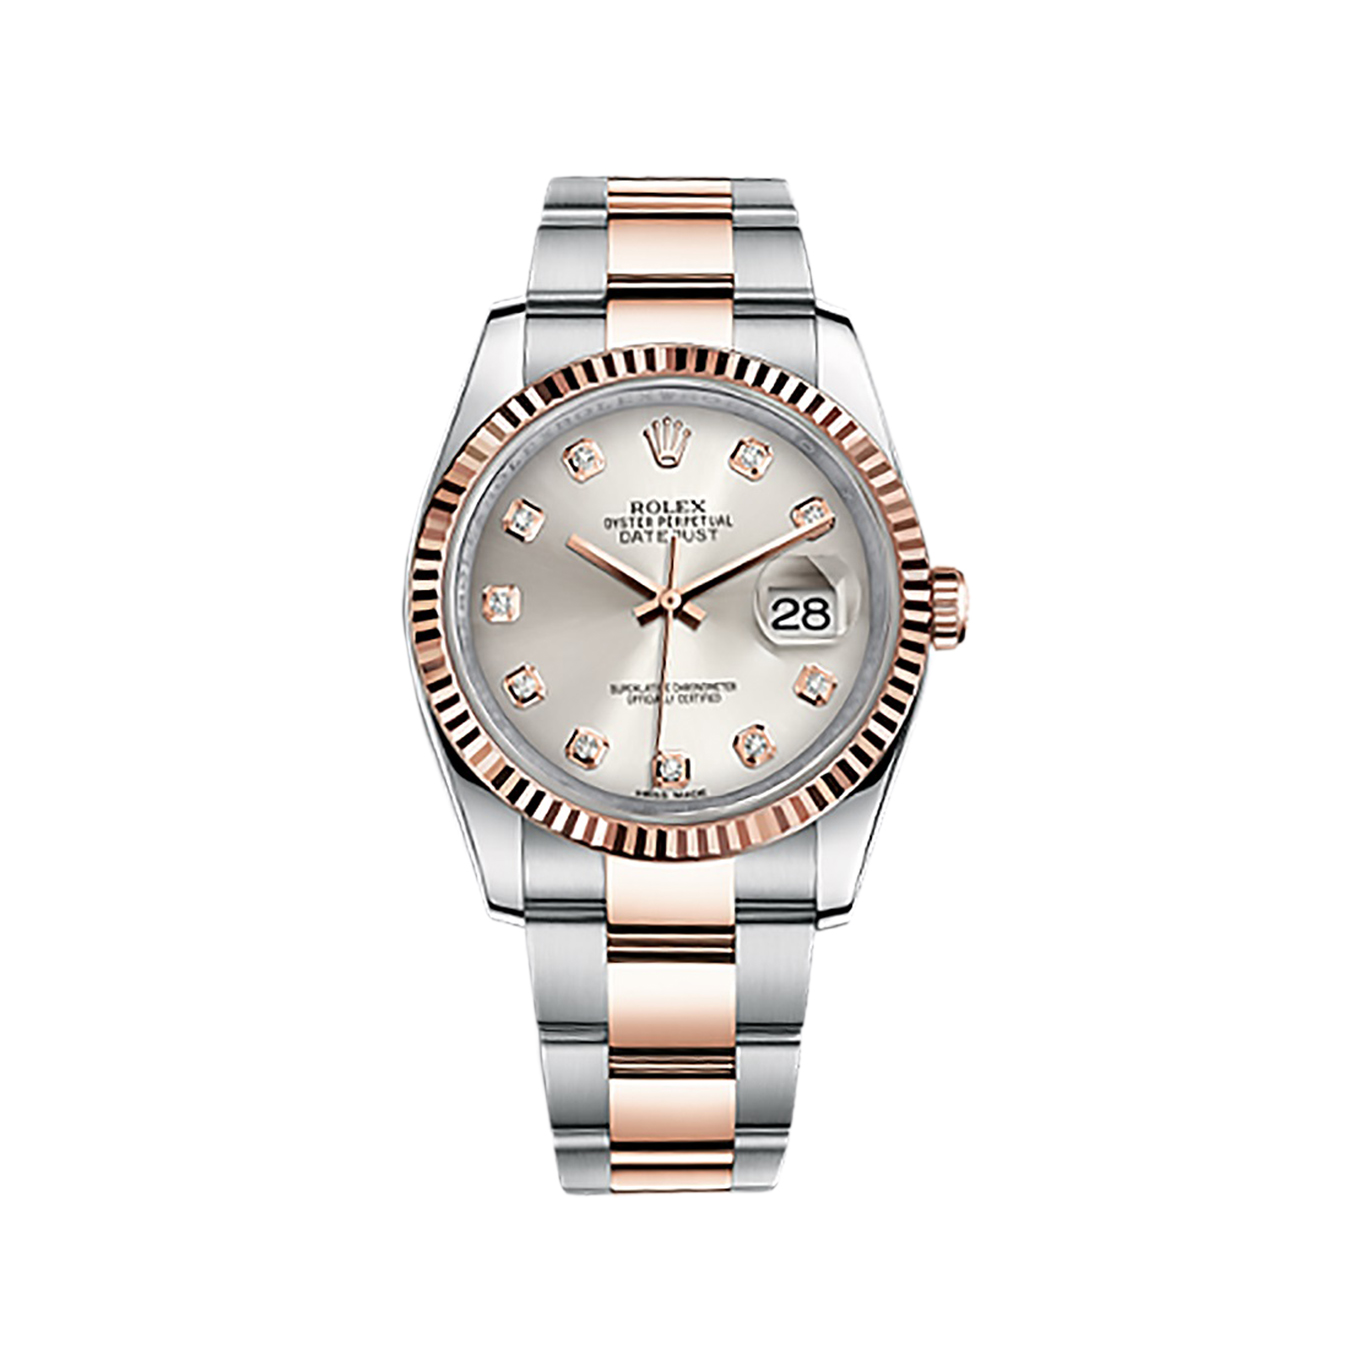 Datejust 36 116231 Rose Gold & Stainless Steel Watch (Silver Set with Diamonds) - Click Image to Close